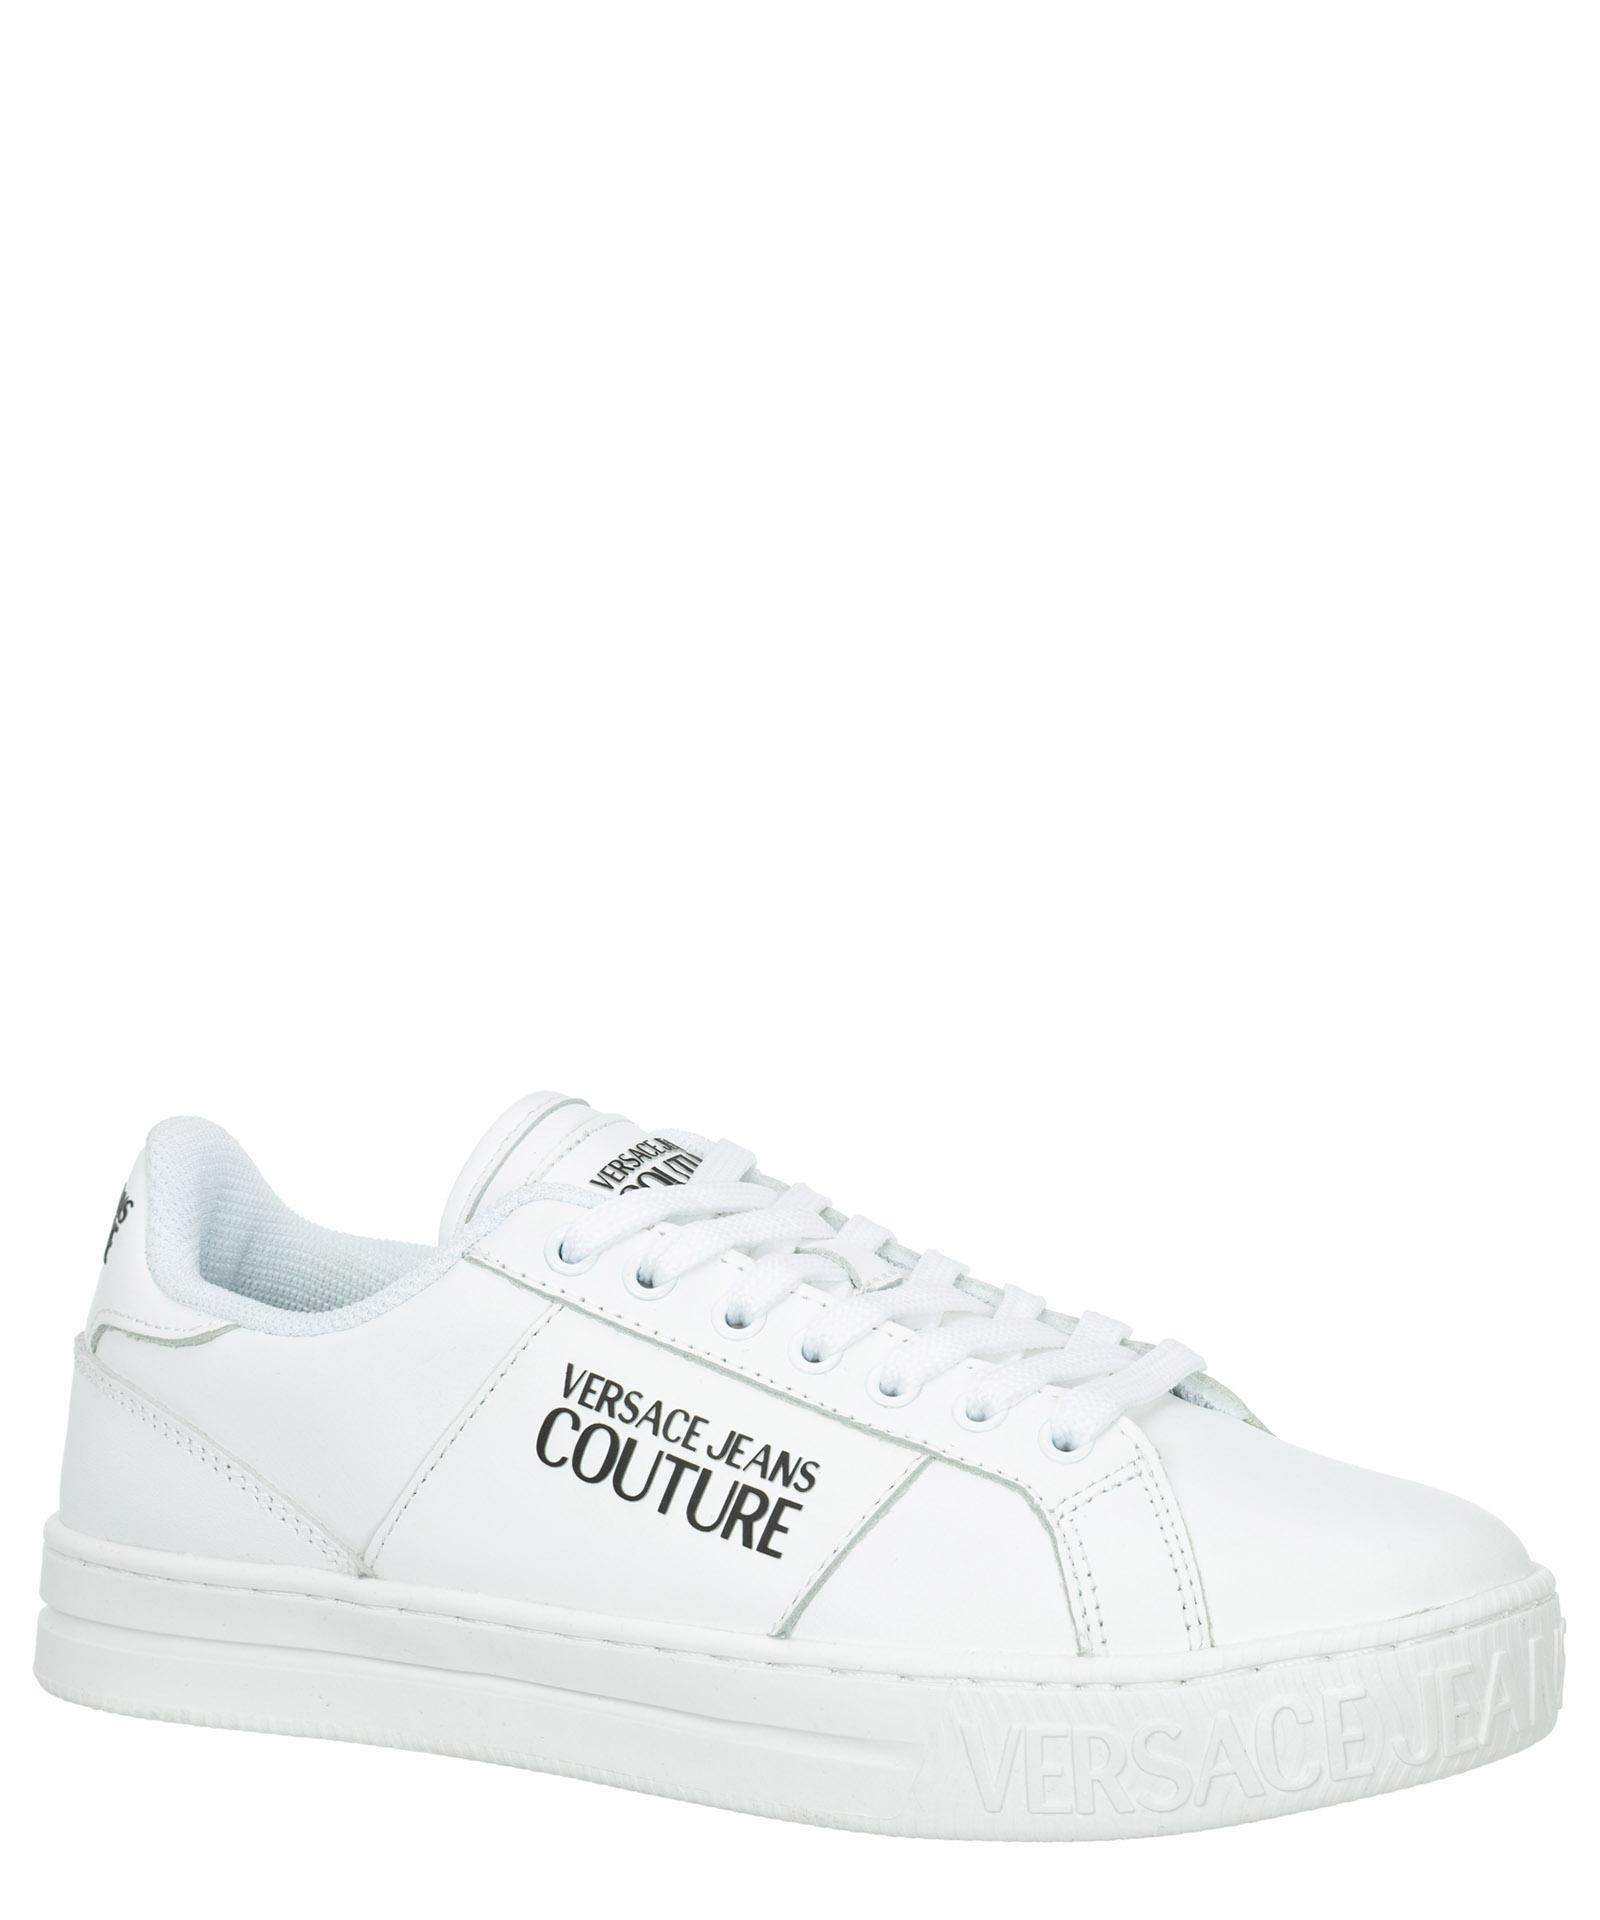 Versace Jeans Couture Court 88 Sneakers in White | Lyst